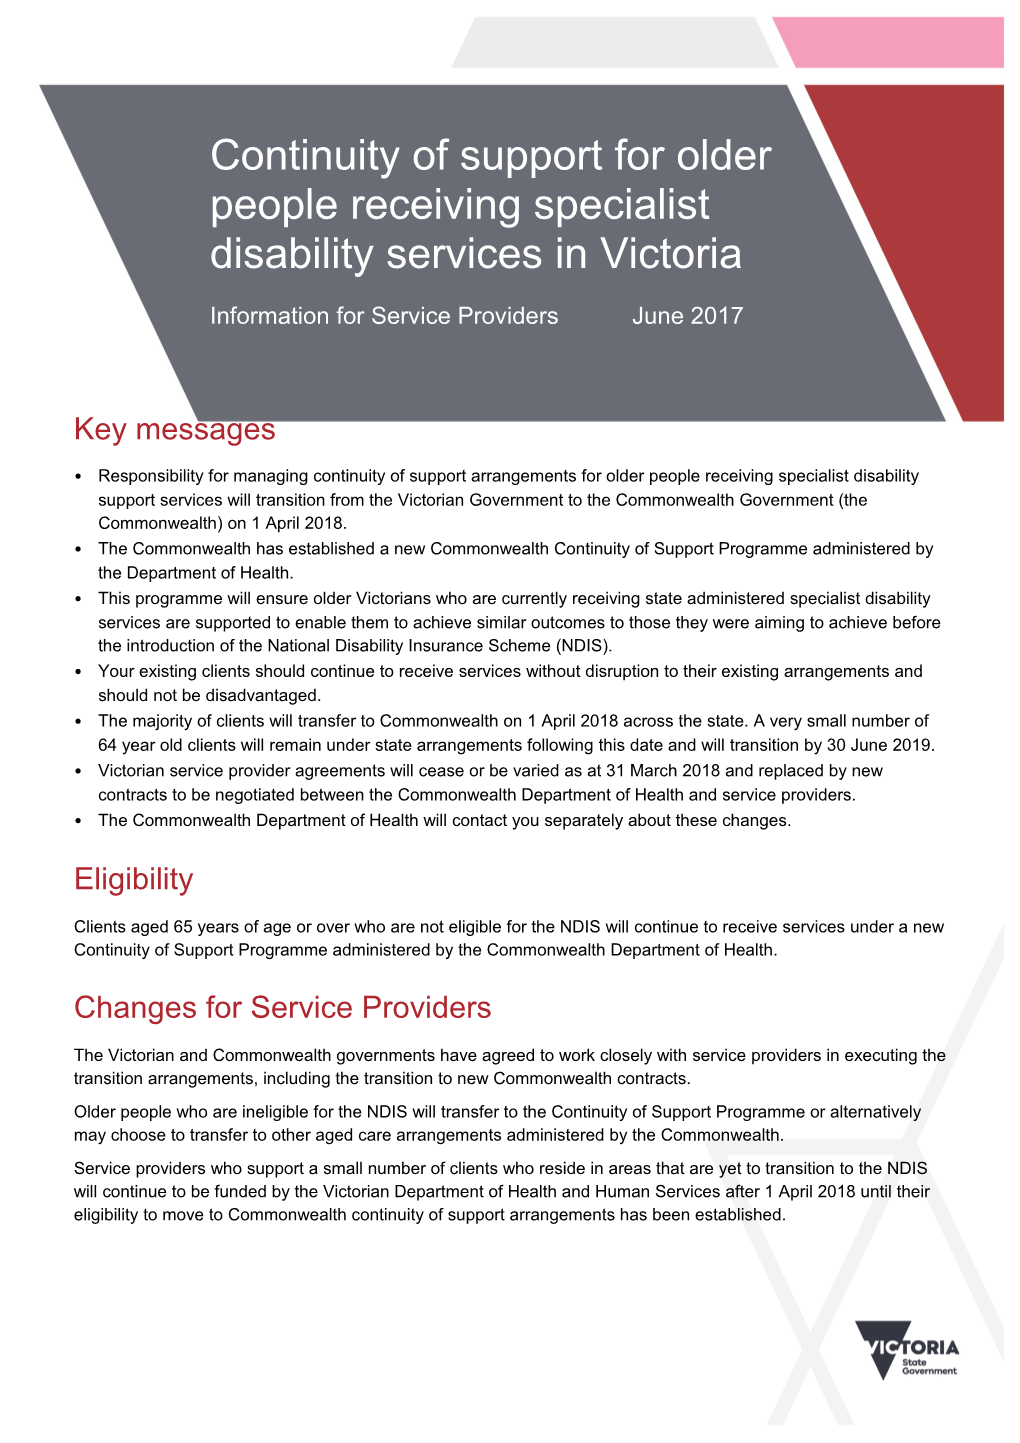 Continuity of Services for Older People Receiving Specialist Disability Services -June 2017